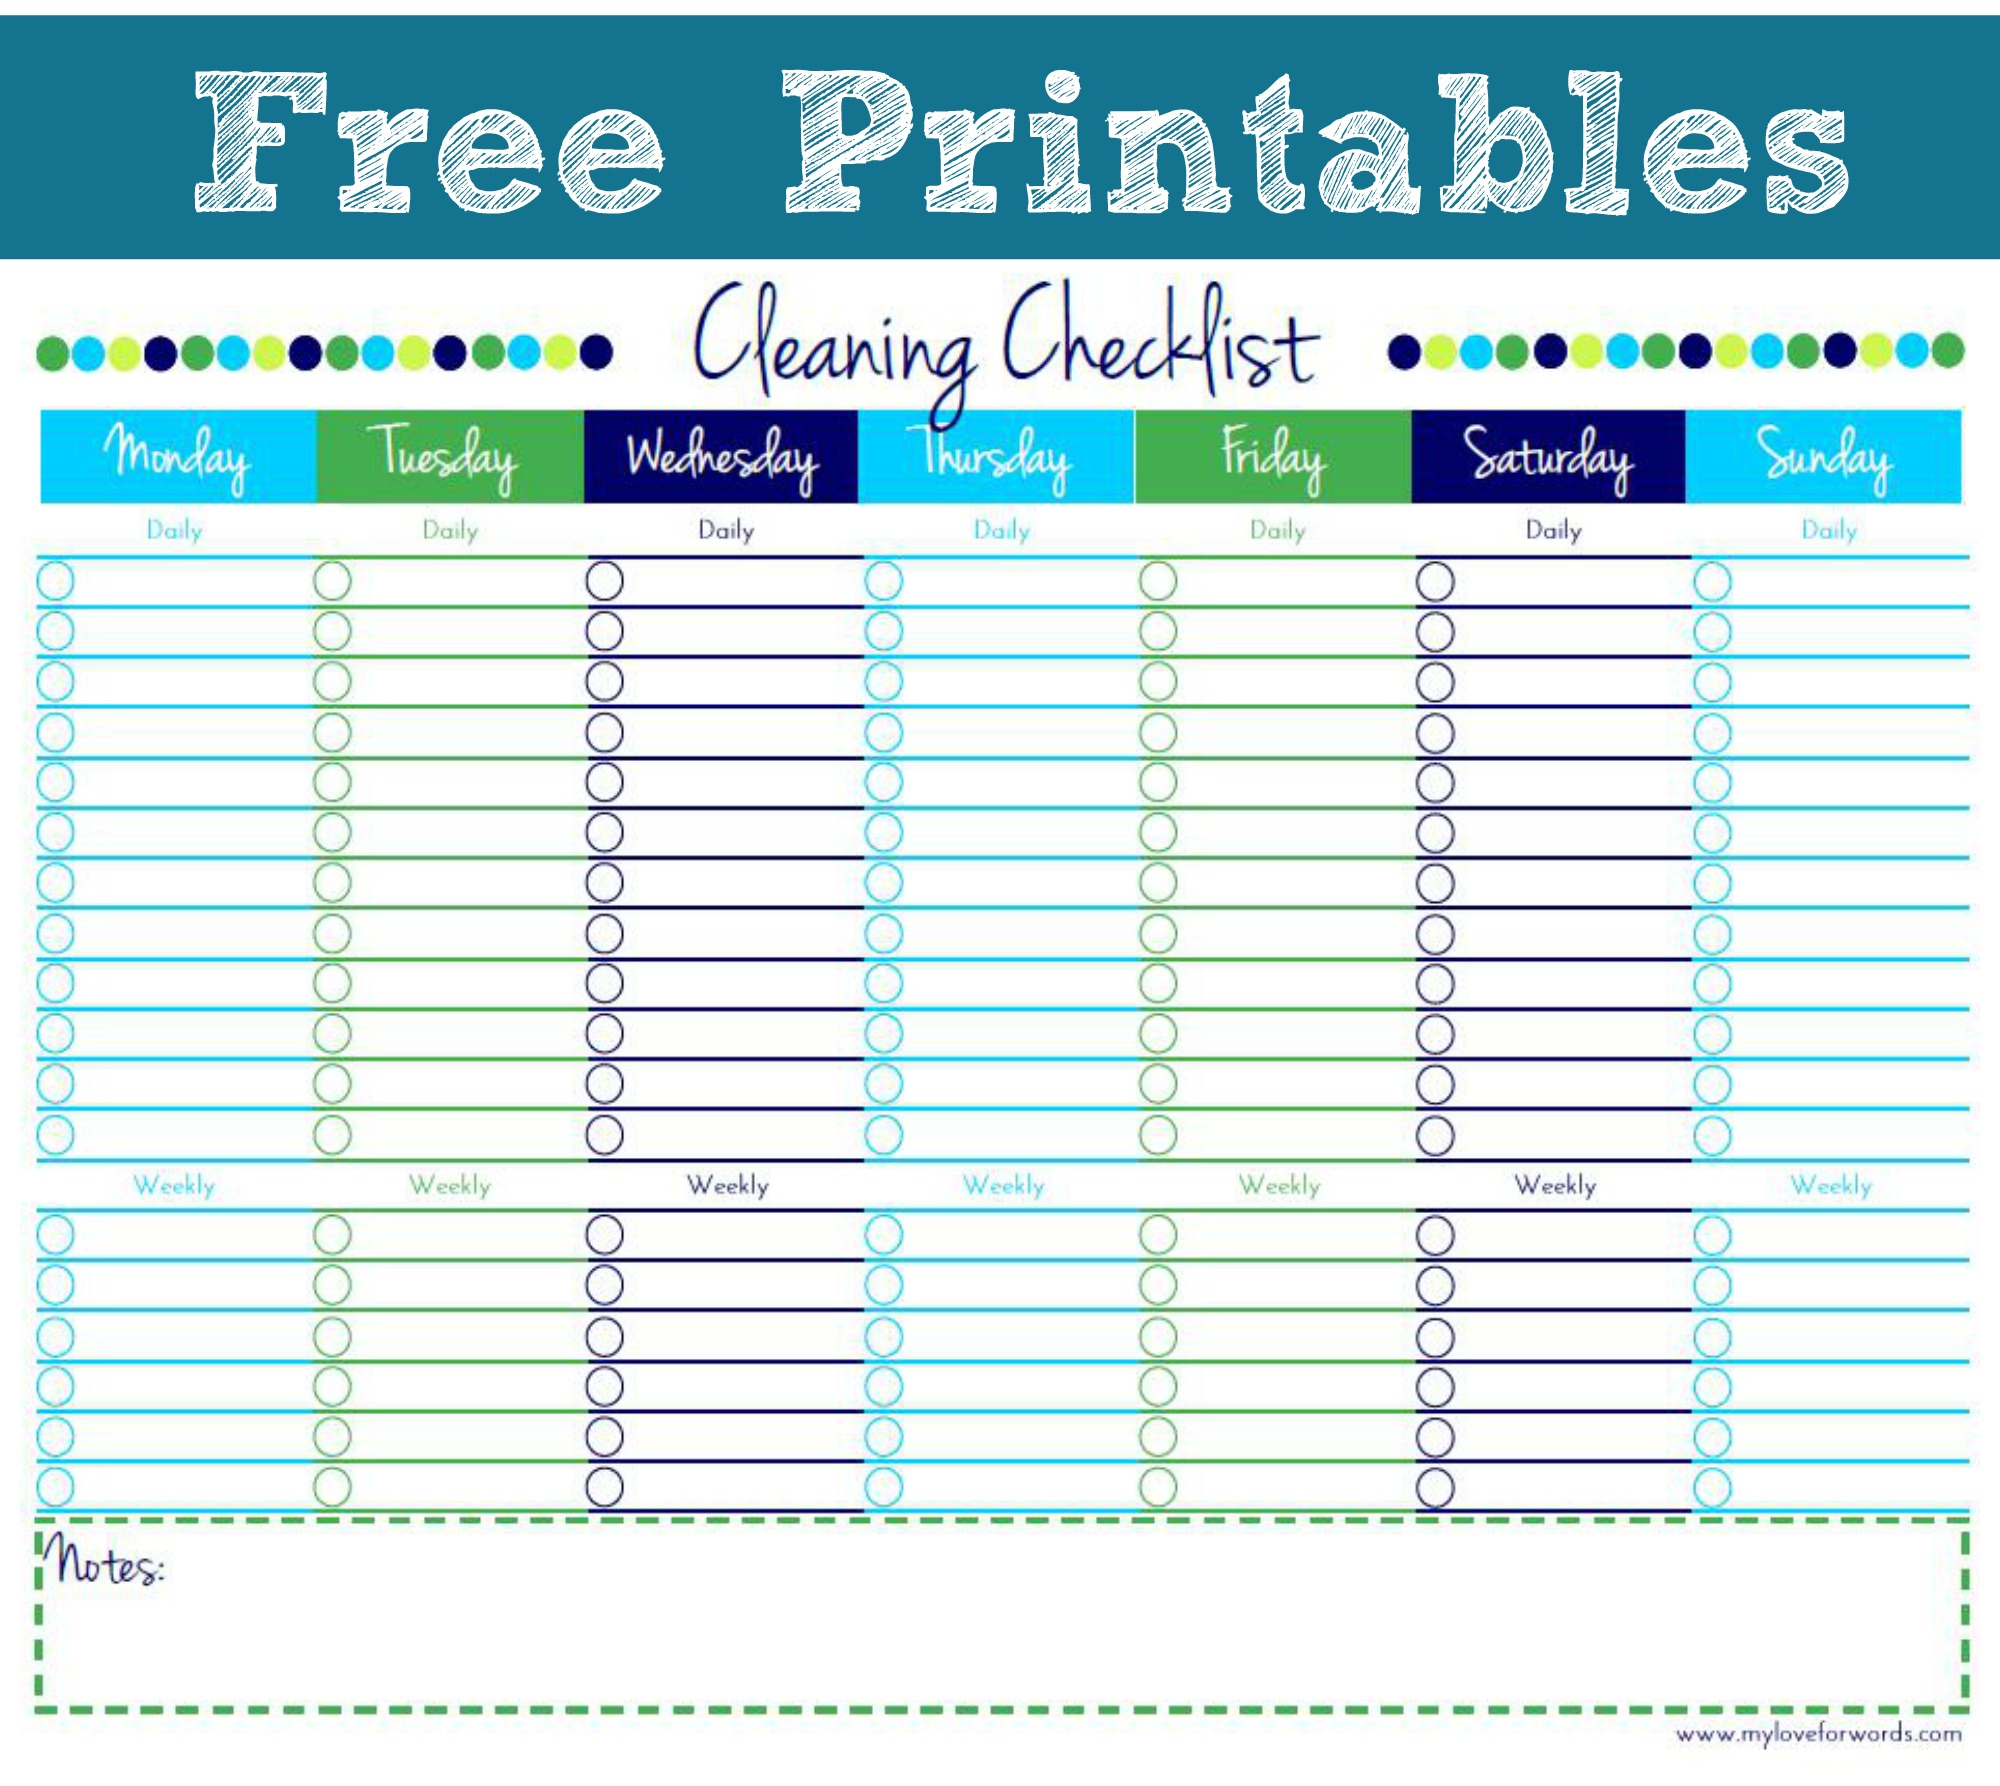 Cleaning Checklist {Free Printable} - Free Printable Cleaning Schedule